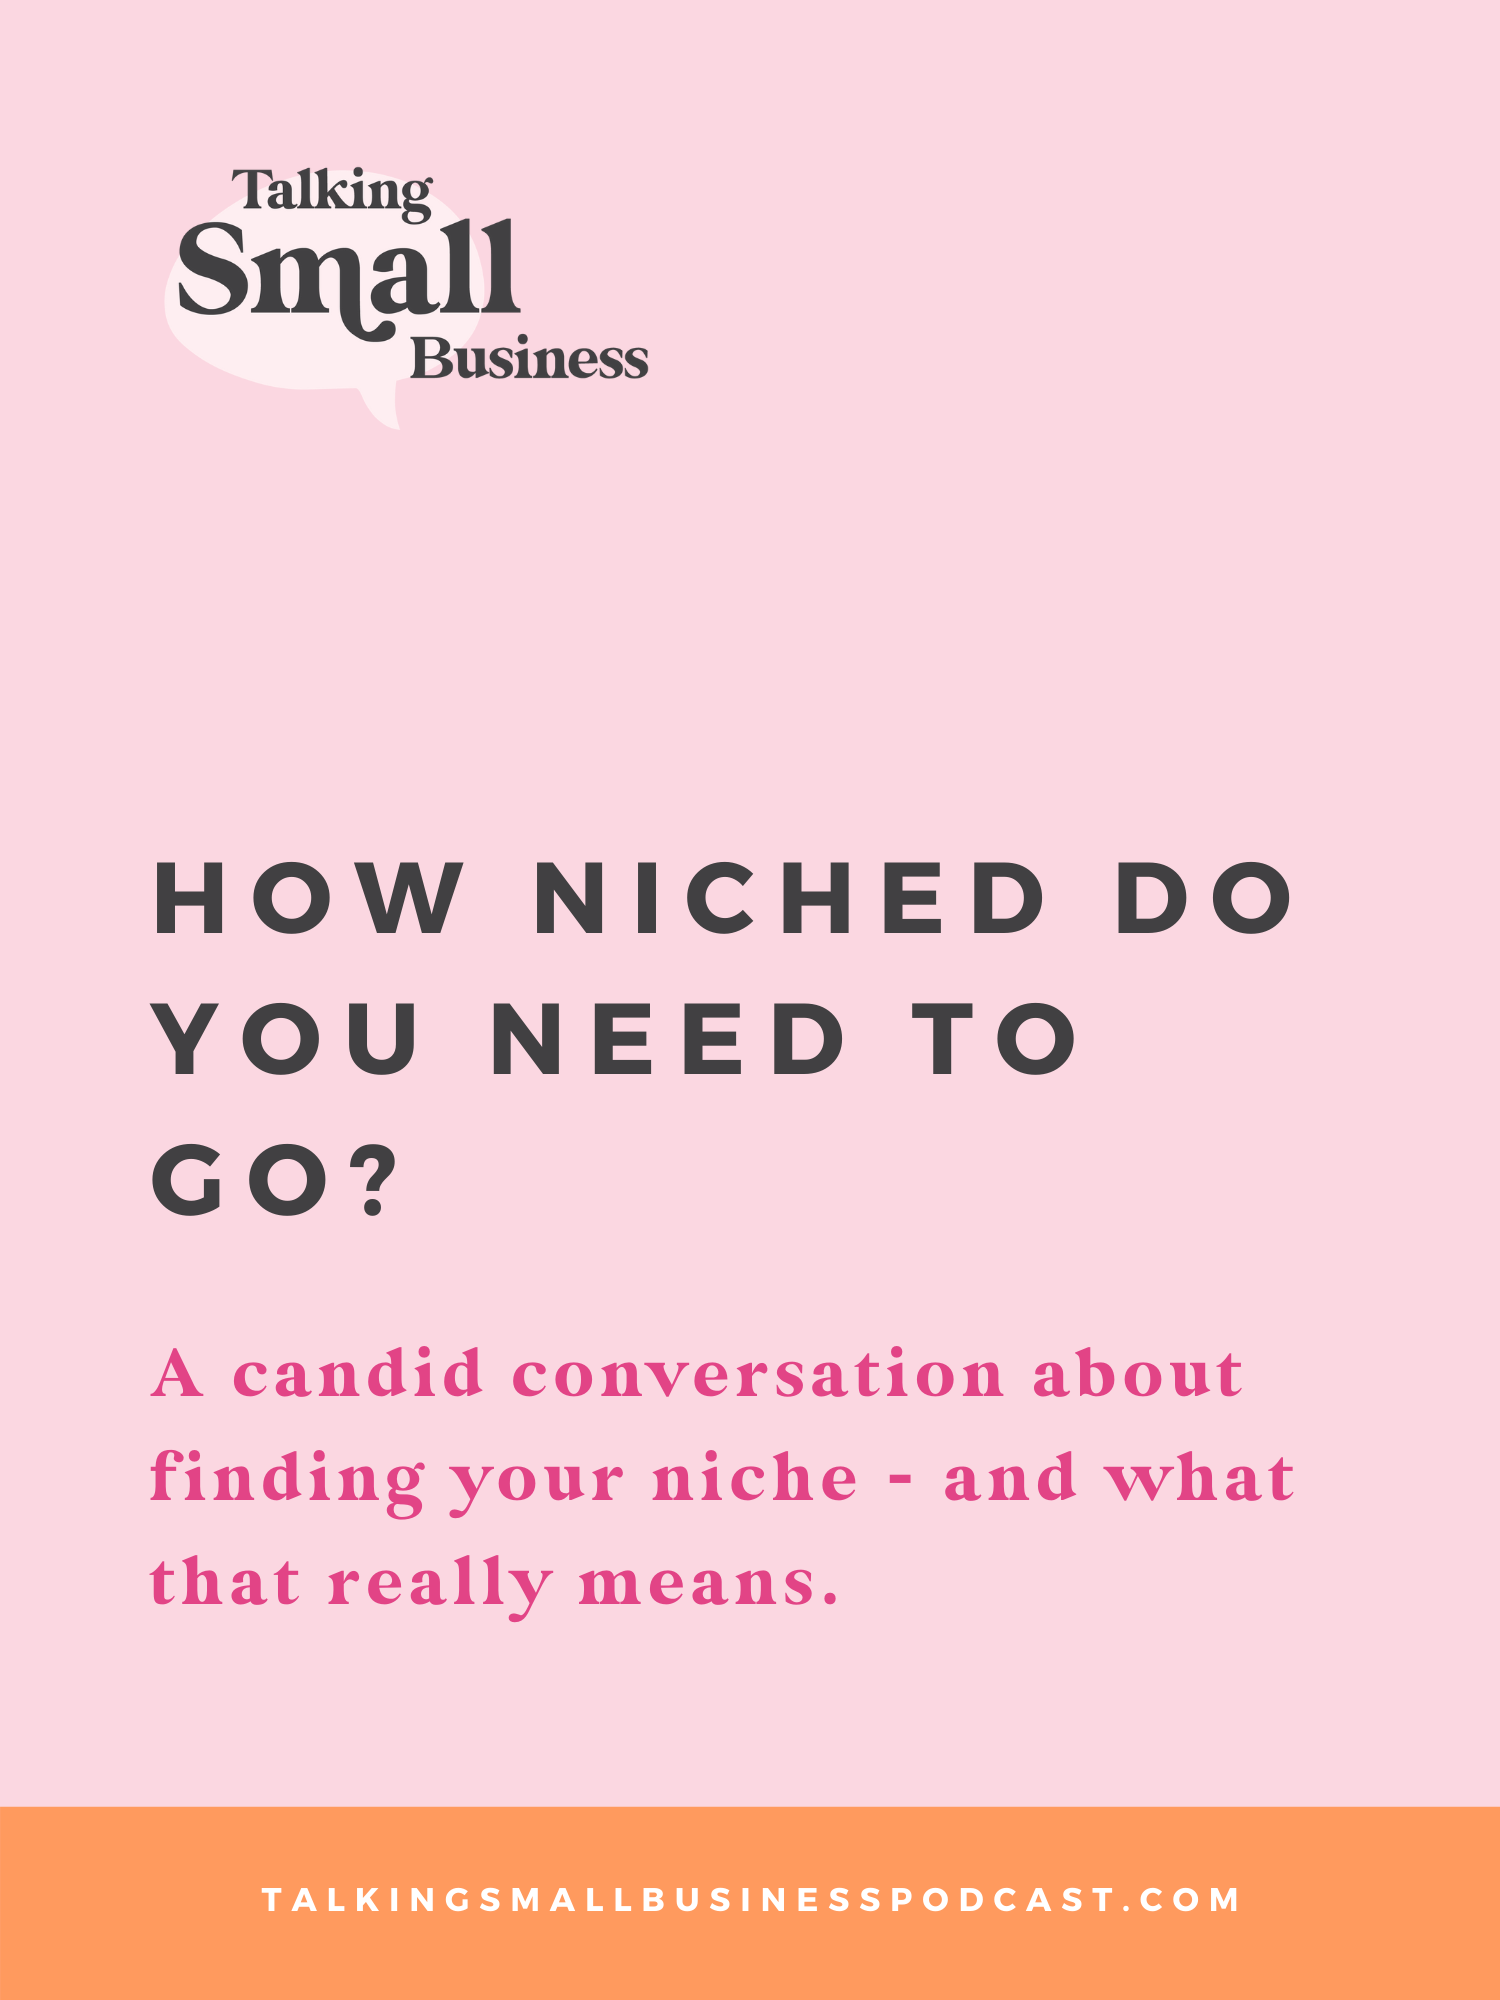 How niched do you need to go: a candid conversation about narrowing your business focus on the Talking Small Business podcast